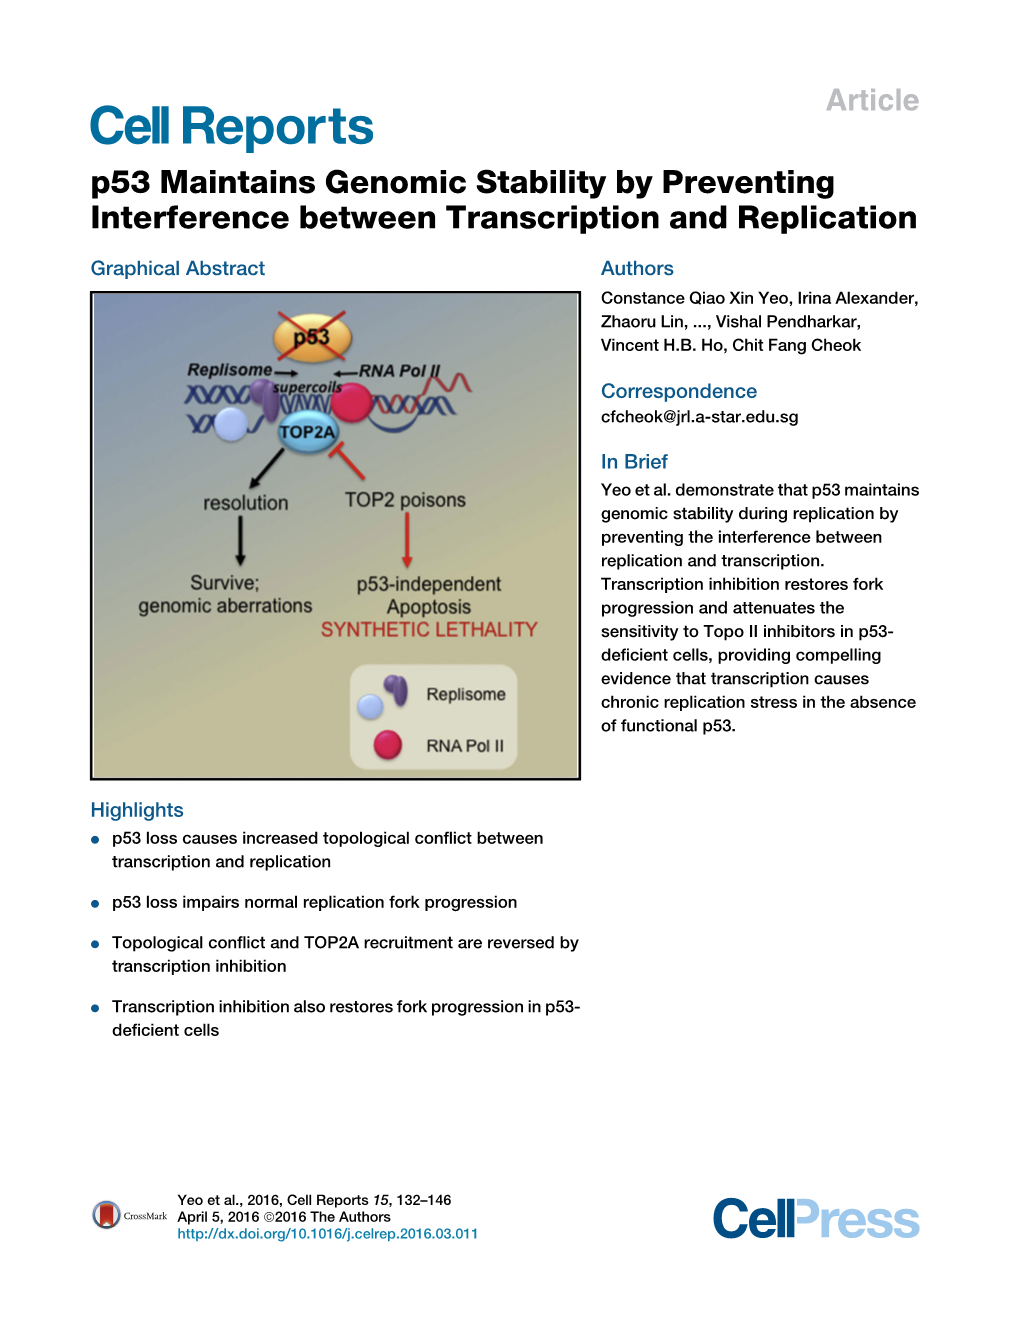 P53 Maintains Genomic Stability by Preventing Interference Between Transcription and Replication